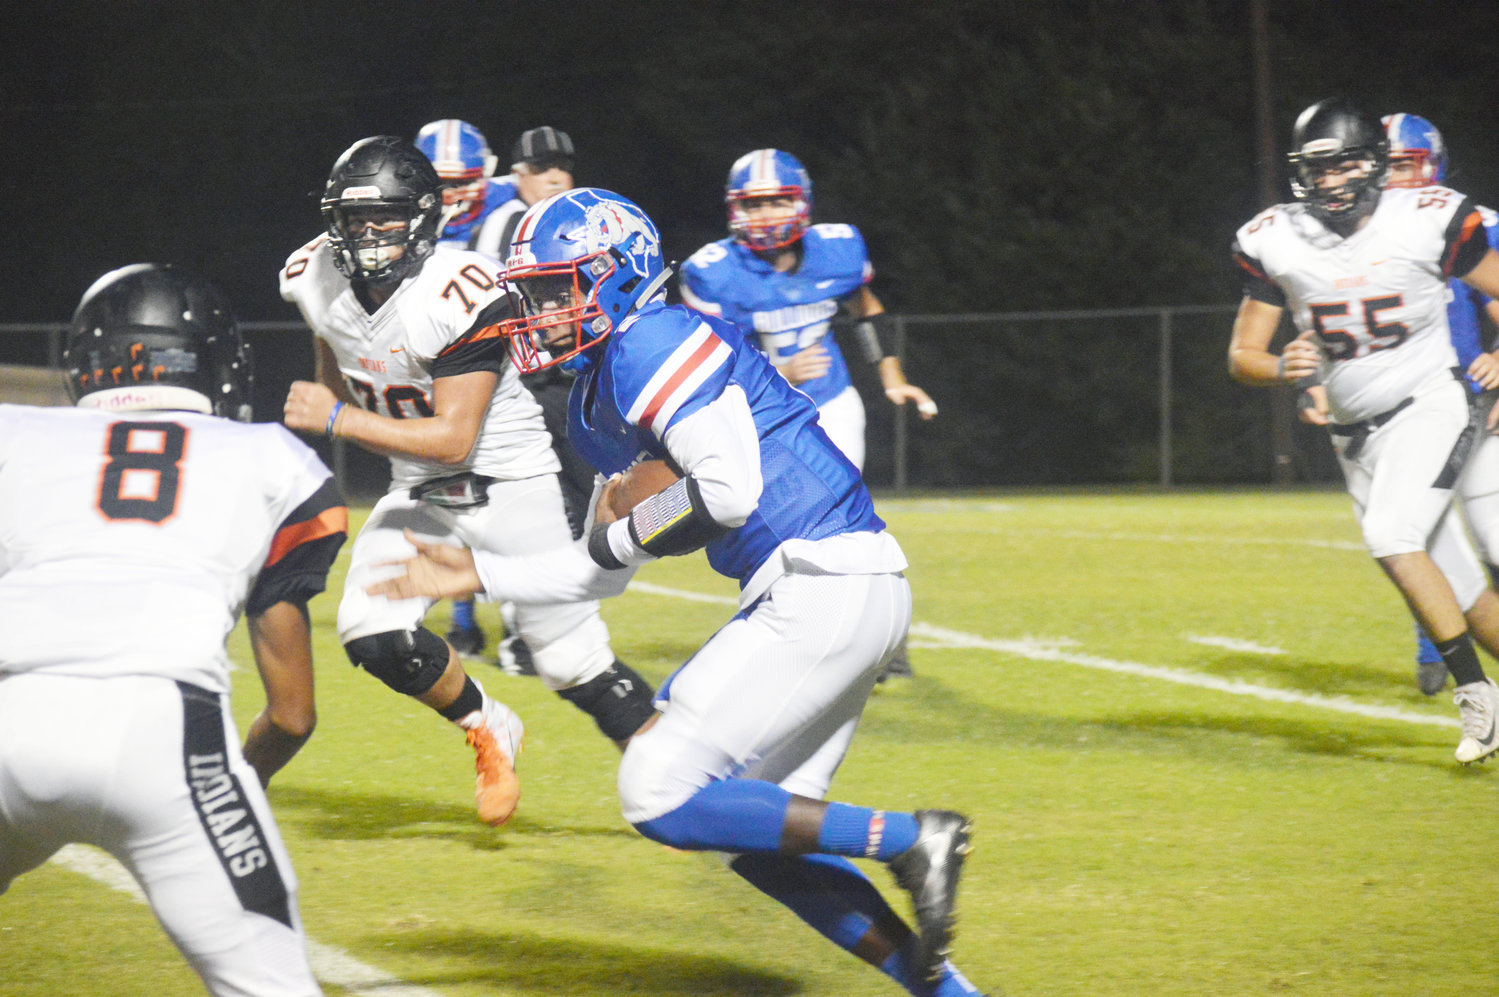 Quitman’s Trey Berry (2) looks for running room in Friday’s loss to Grand Saline.